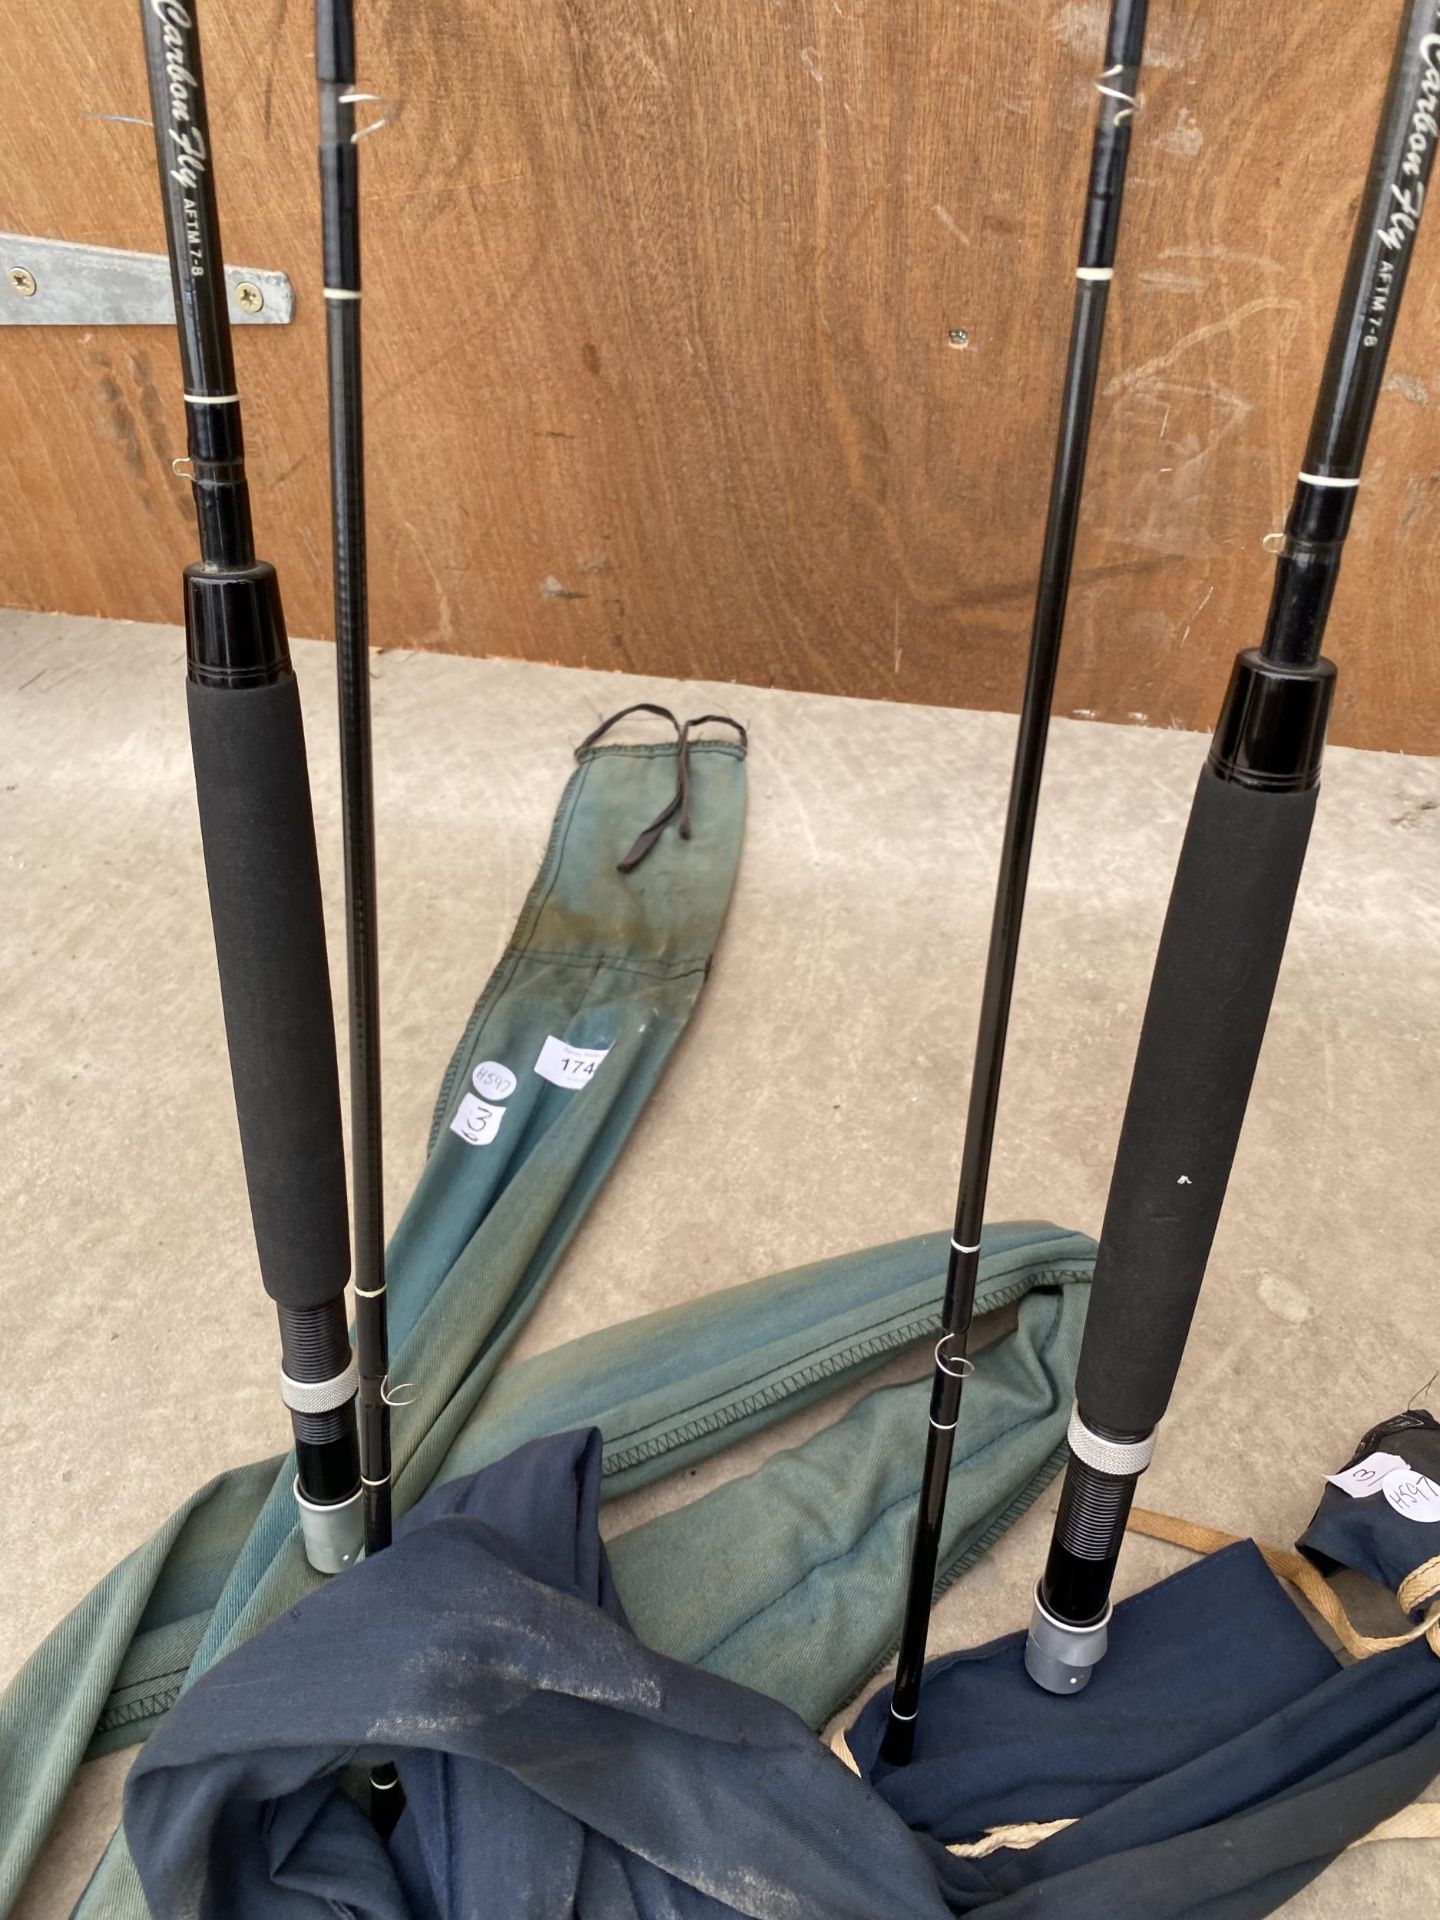 TWO MATCH MASTER 9FT 6" FLY FISHING RODS AFTMA 5-7 - Image 7 of 7